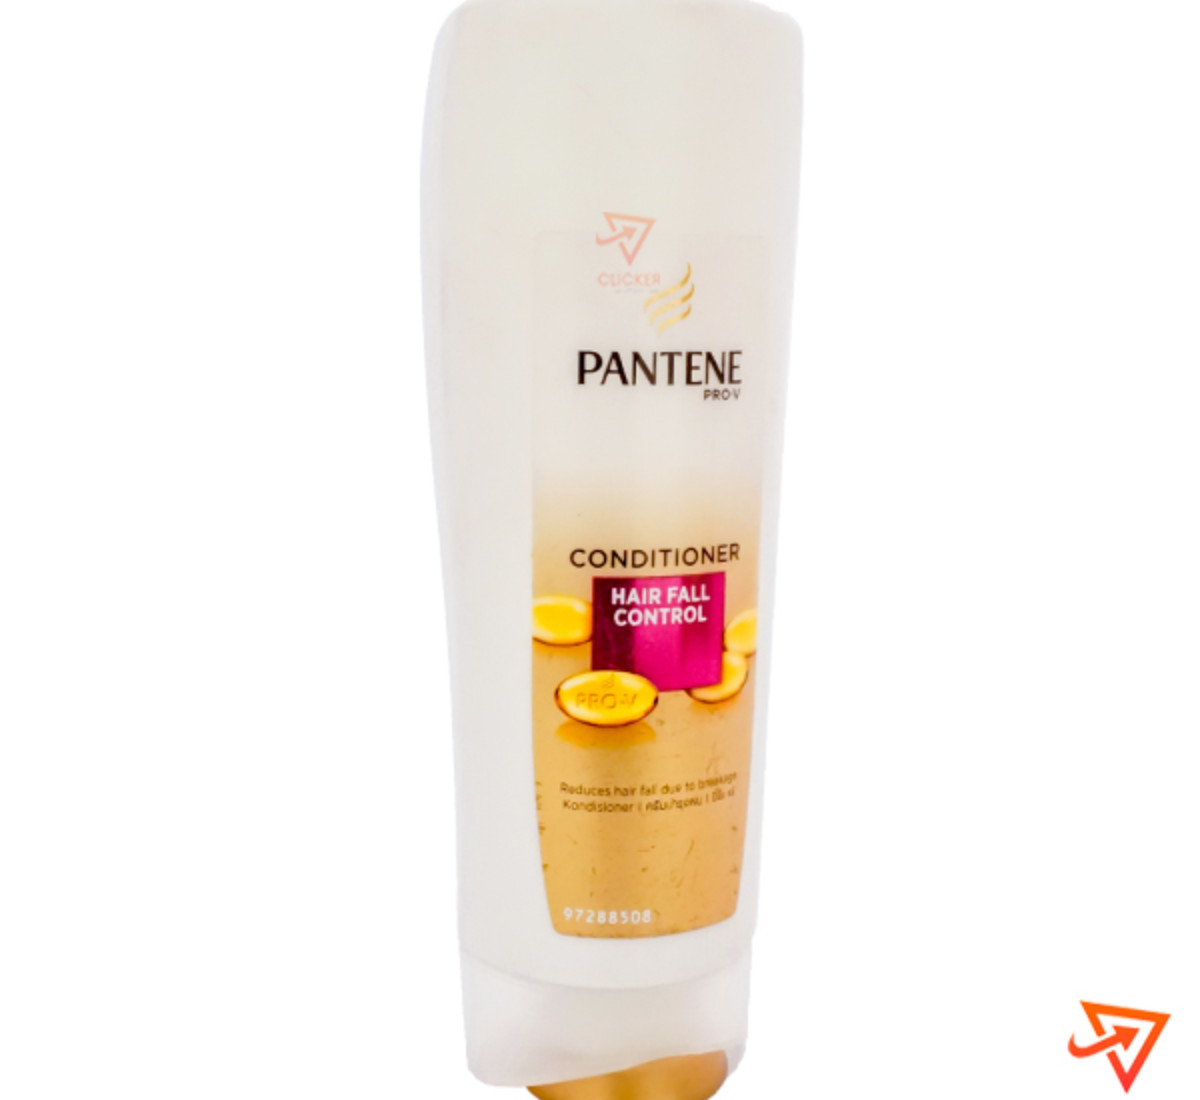 Clicker product 75ml PANTENE conditioner hair fall control 1080